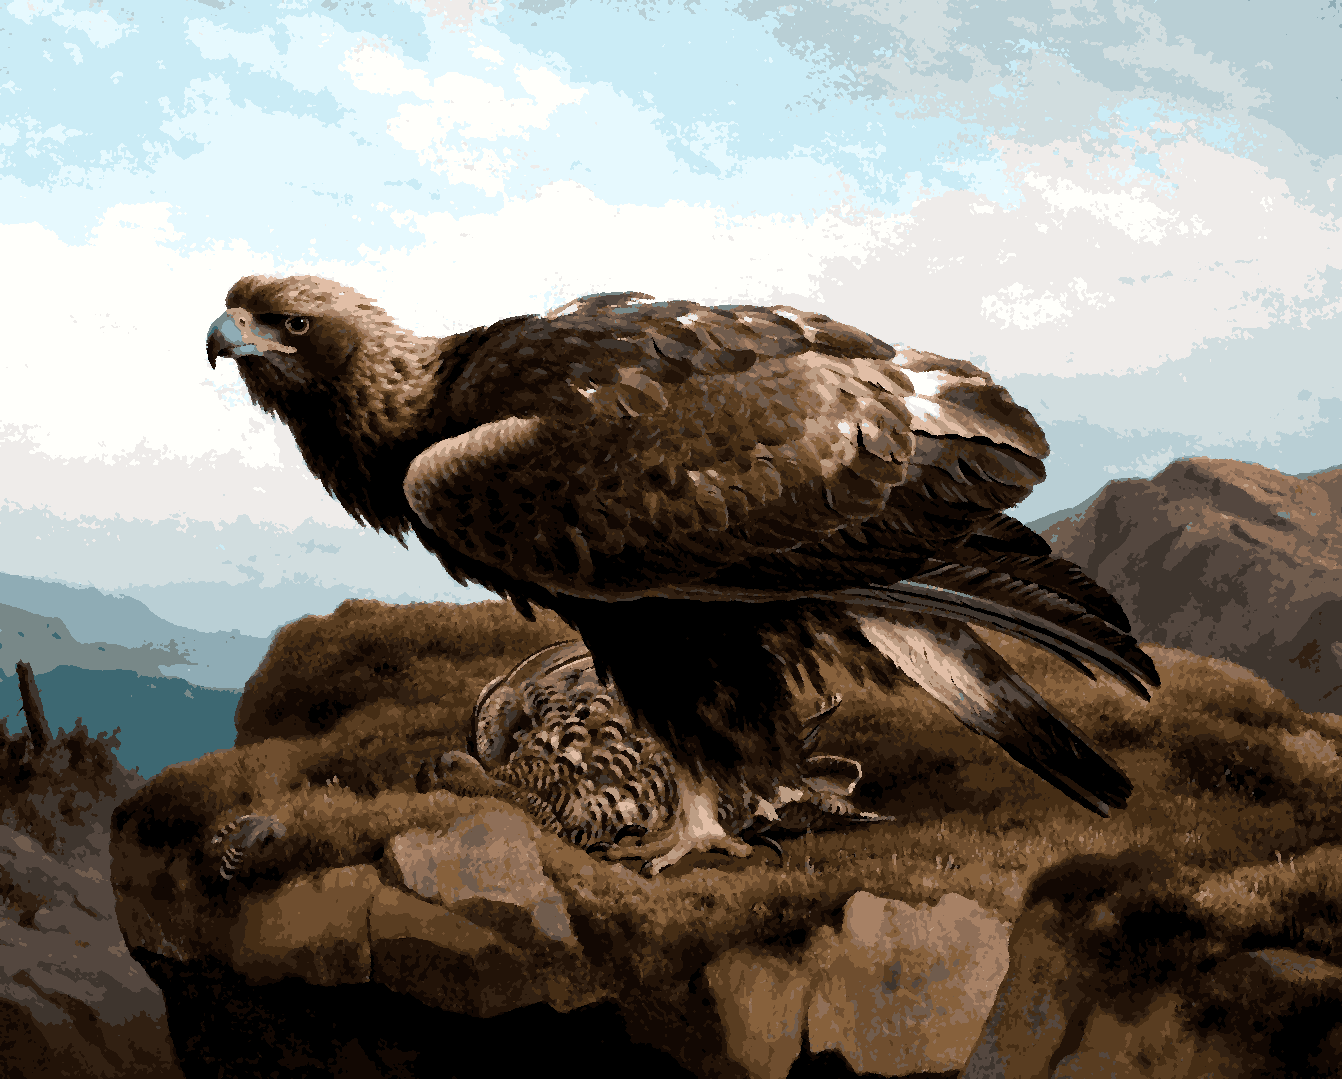 Golden Eagle At A Cliff’s Edge by Ferdinand von Wrigh - Van-Go Paint-By-Number Kit